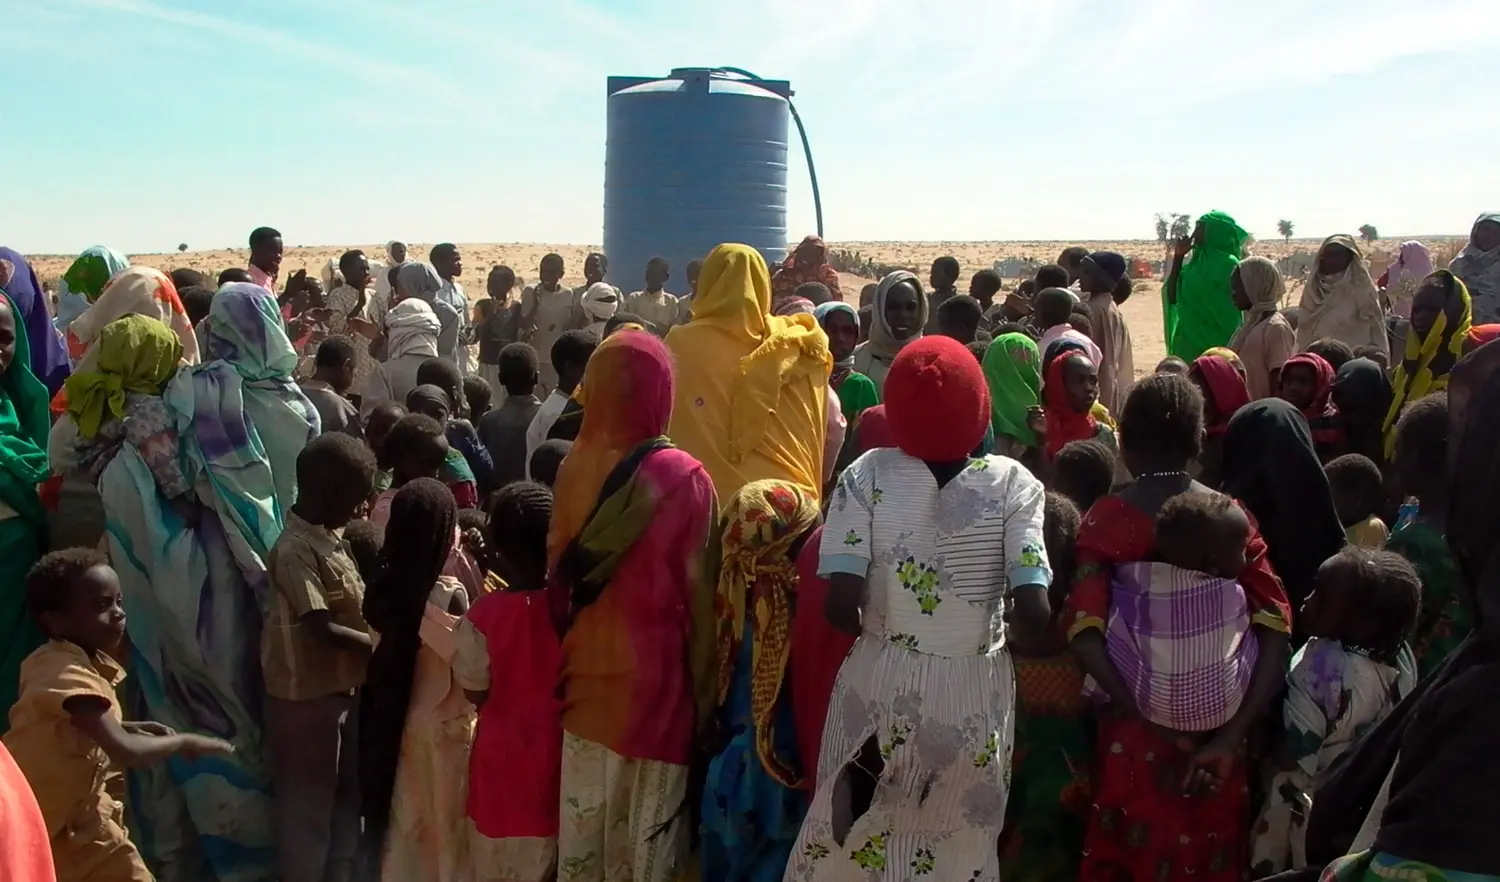 Displaced persons waiting at a water tank in Geneina, West Darfur, in 2007.